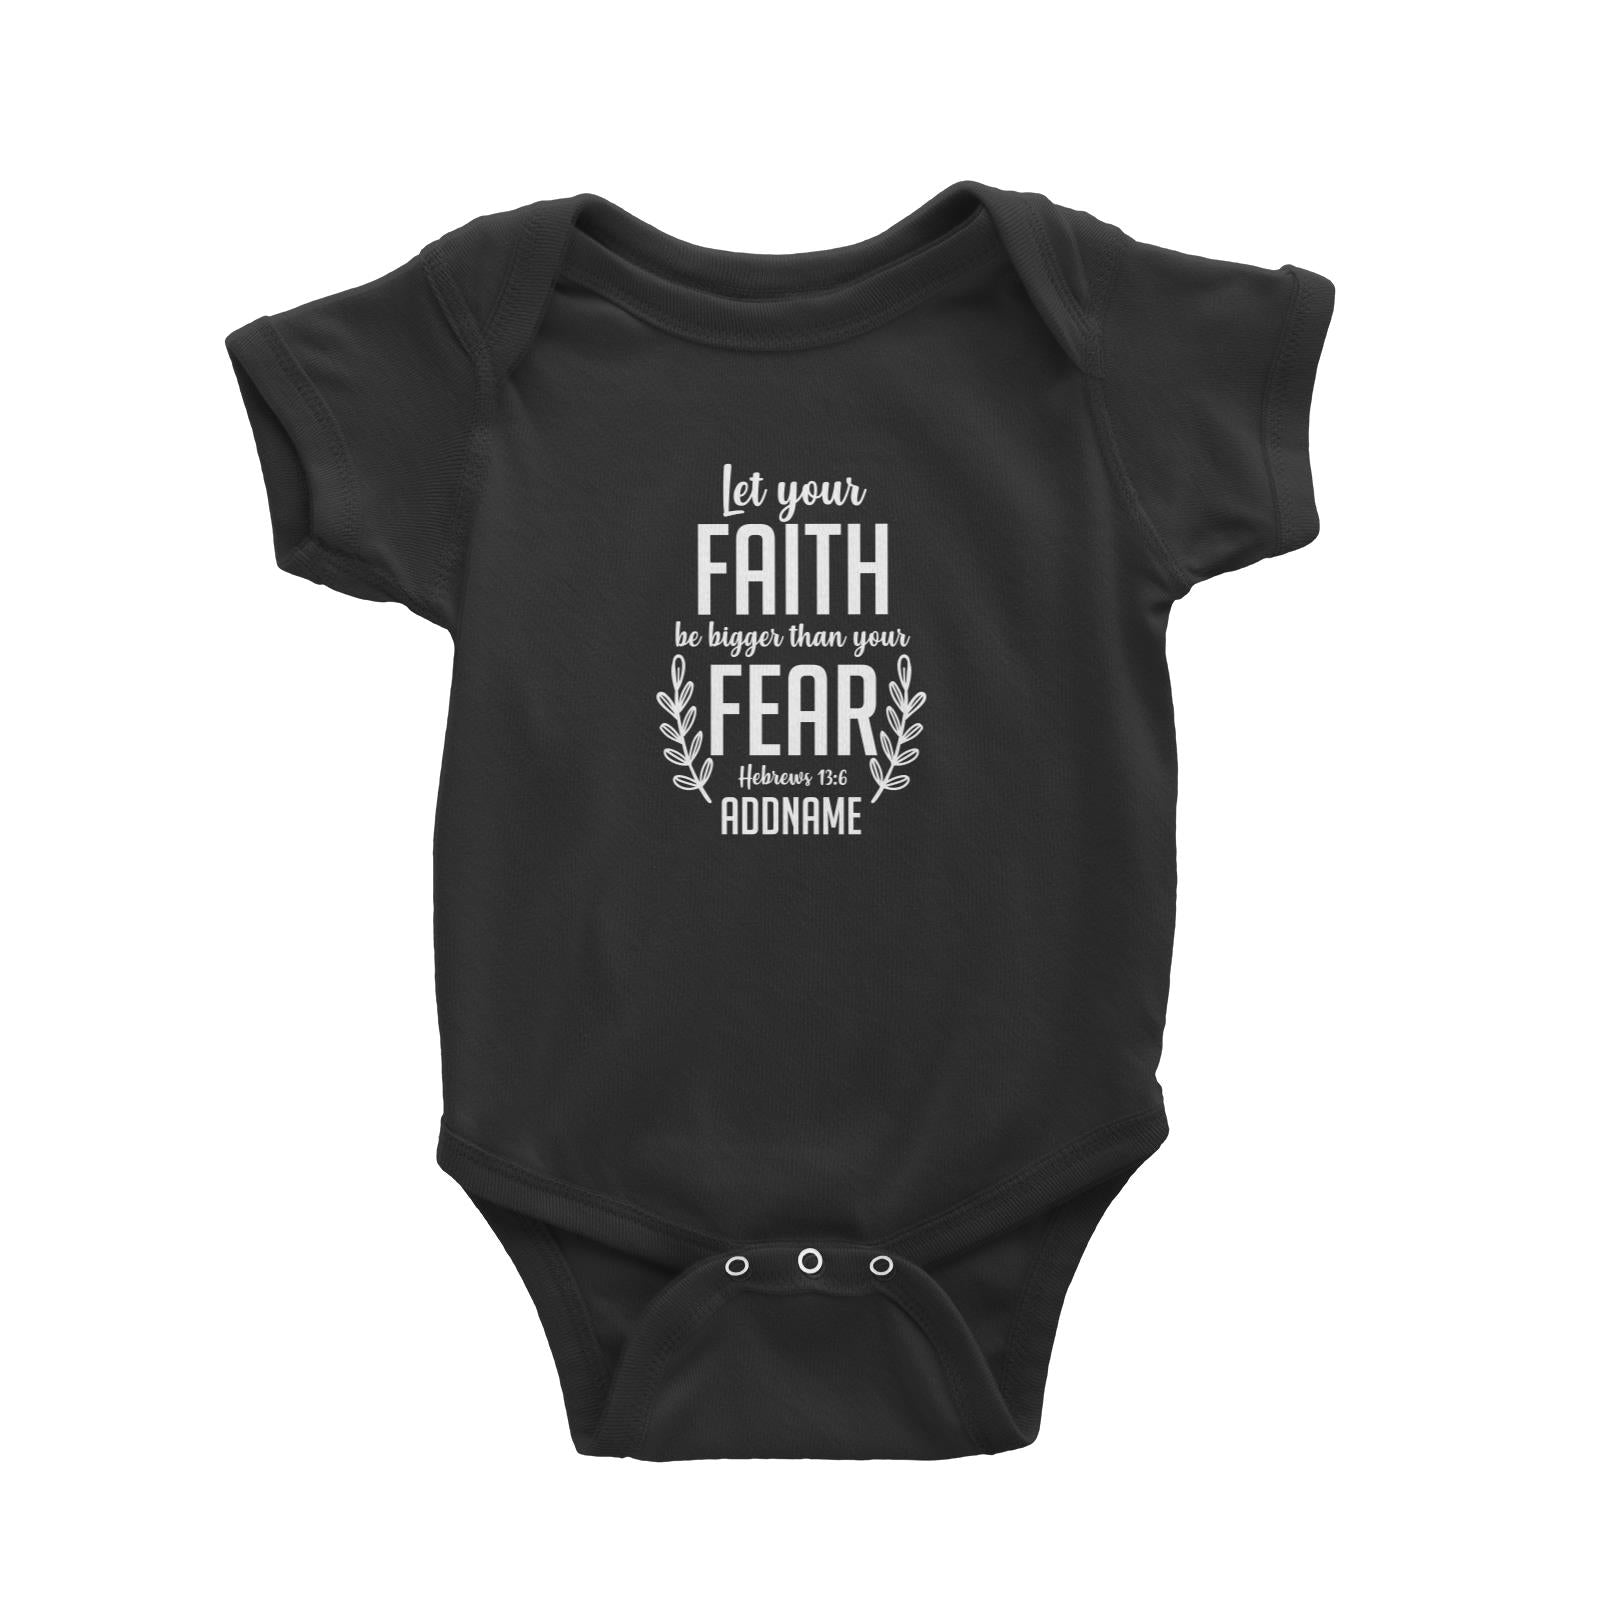 Christ Newborn Let Your Faith Be Bigger Than Your Fear Hebrews 13.6 Addname Baby Romper